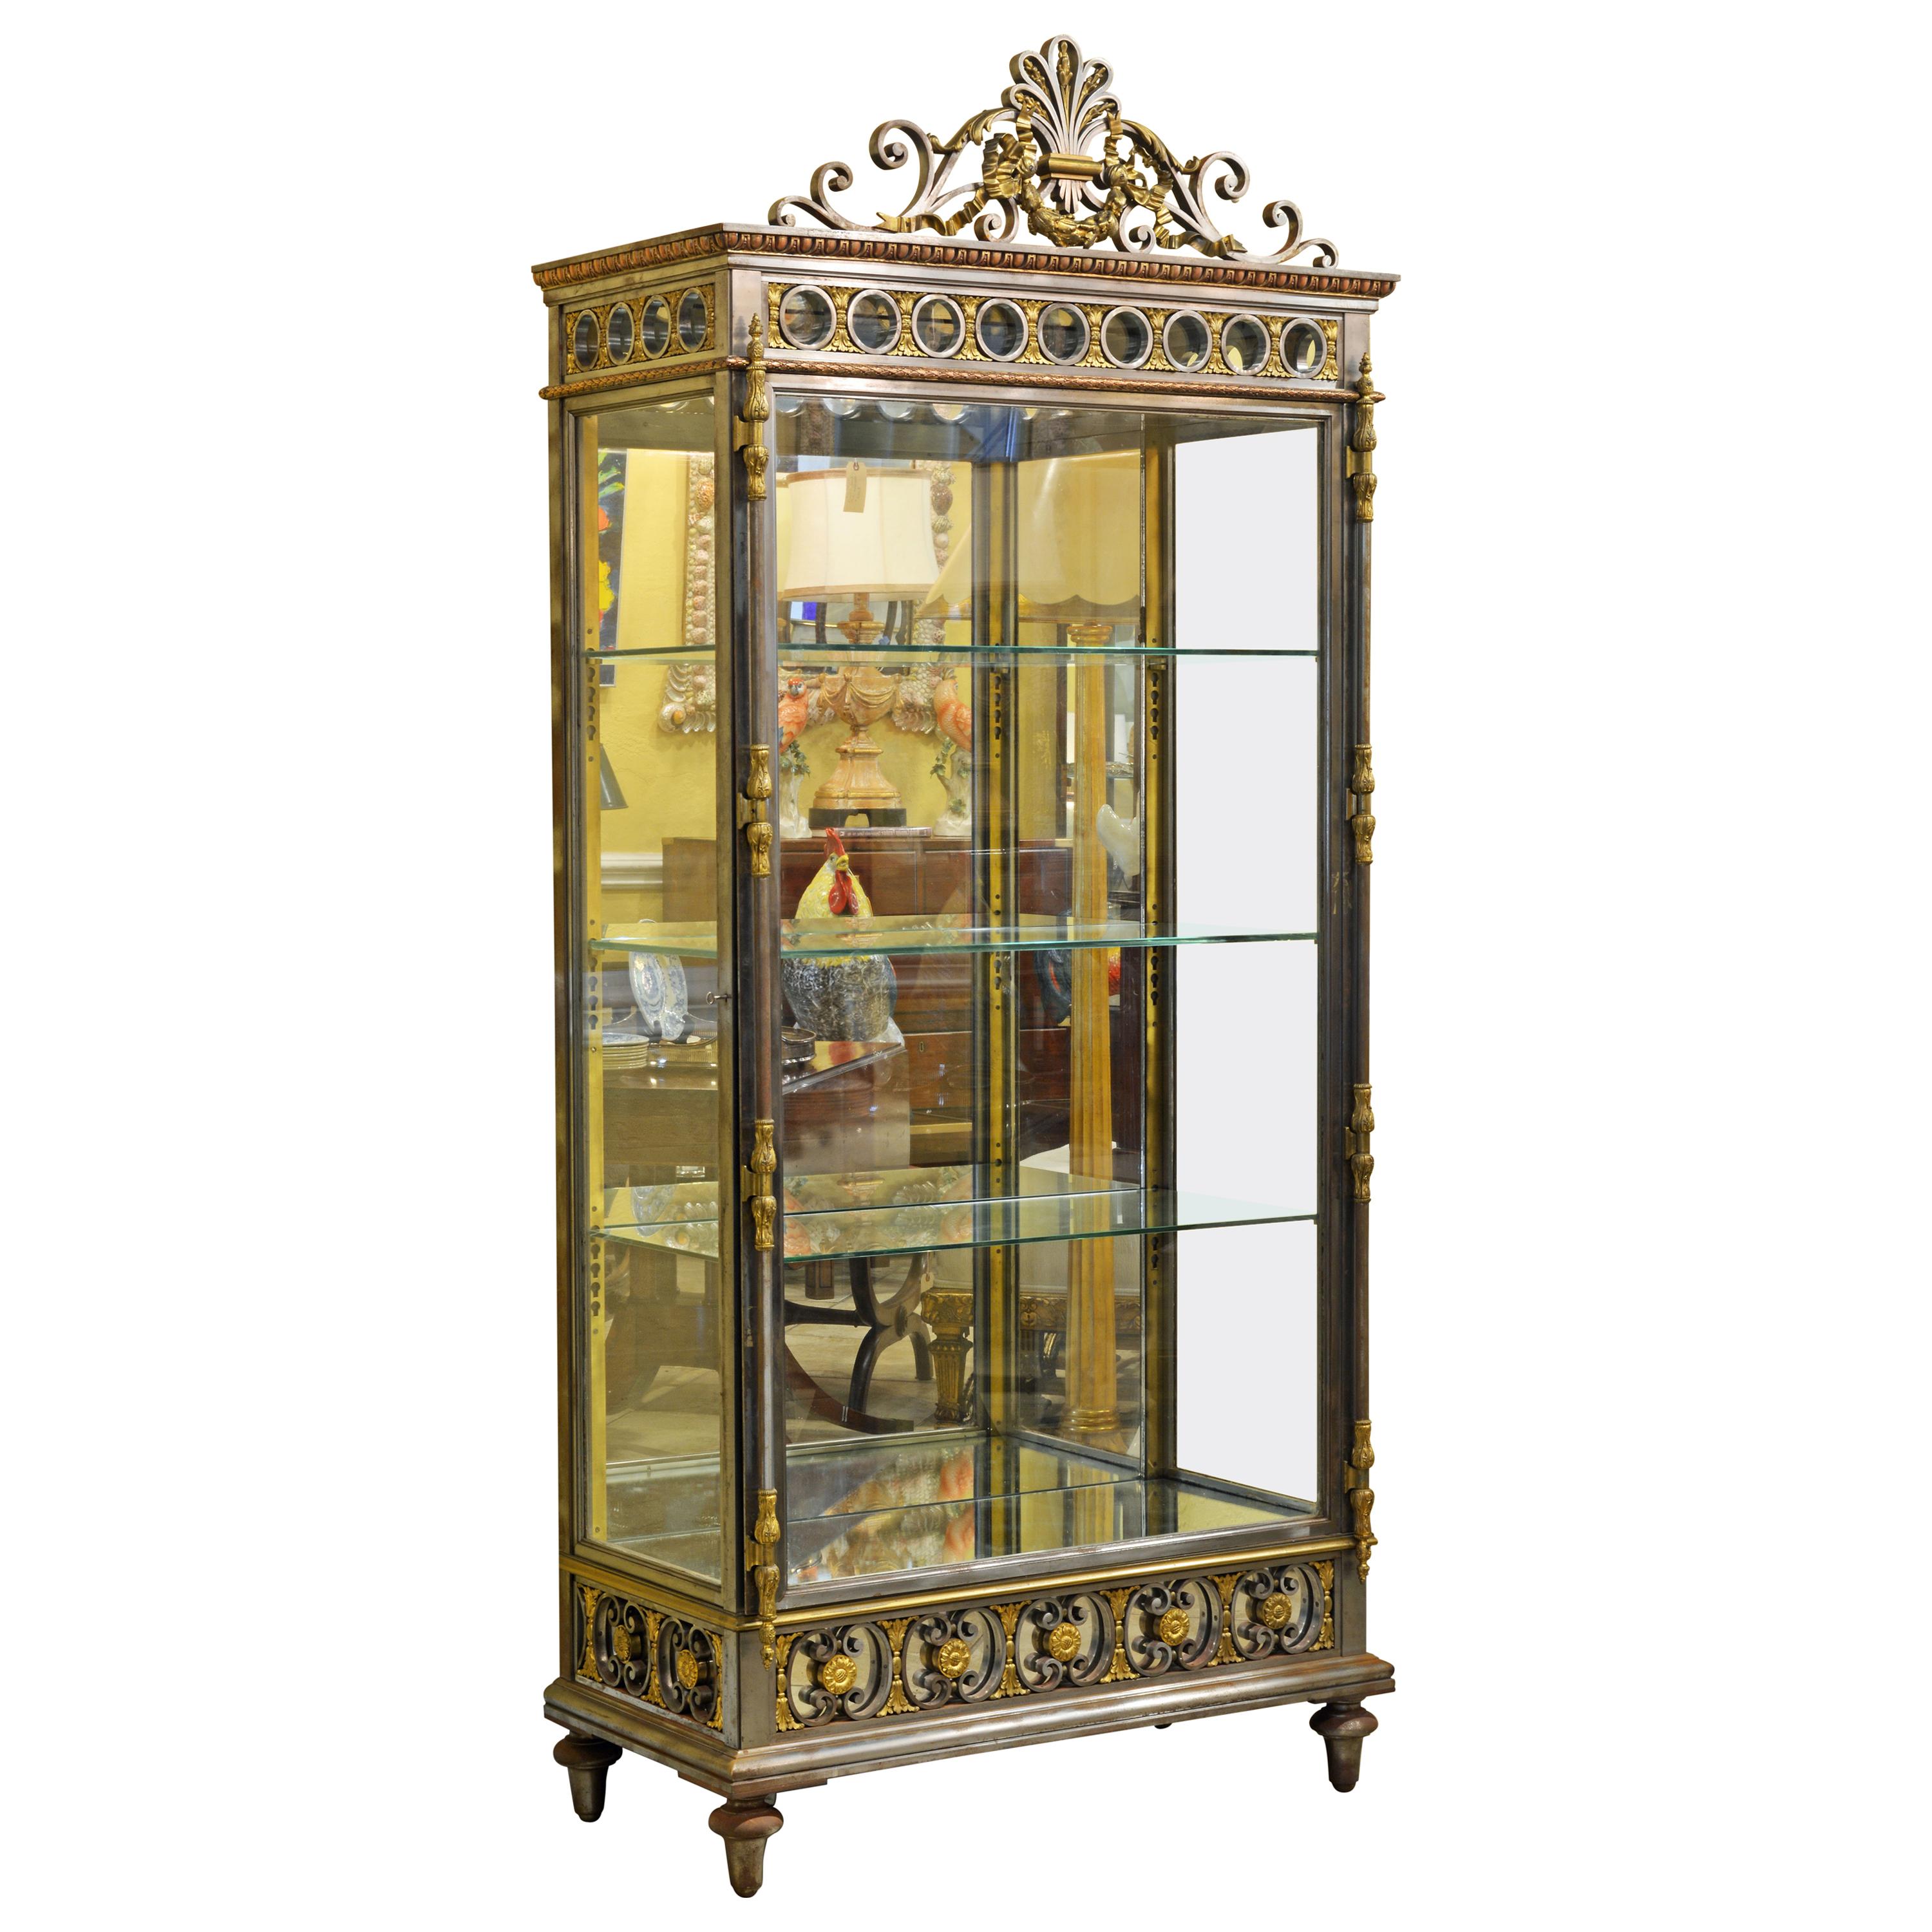 19th Century French Neoclassical Glass and Steel Curio Cabinet or Vitrine